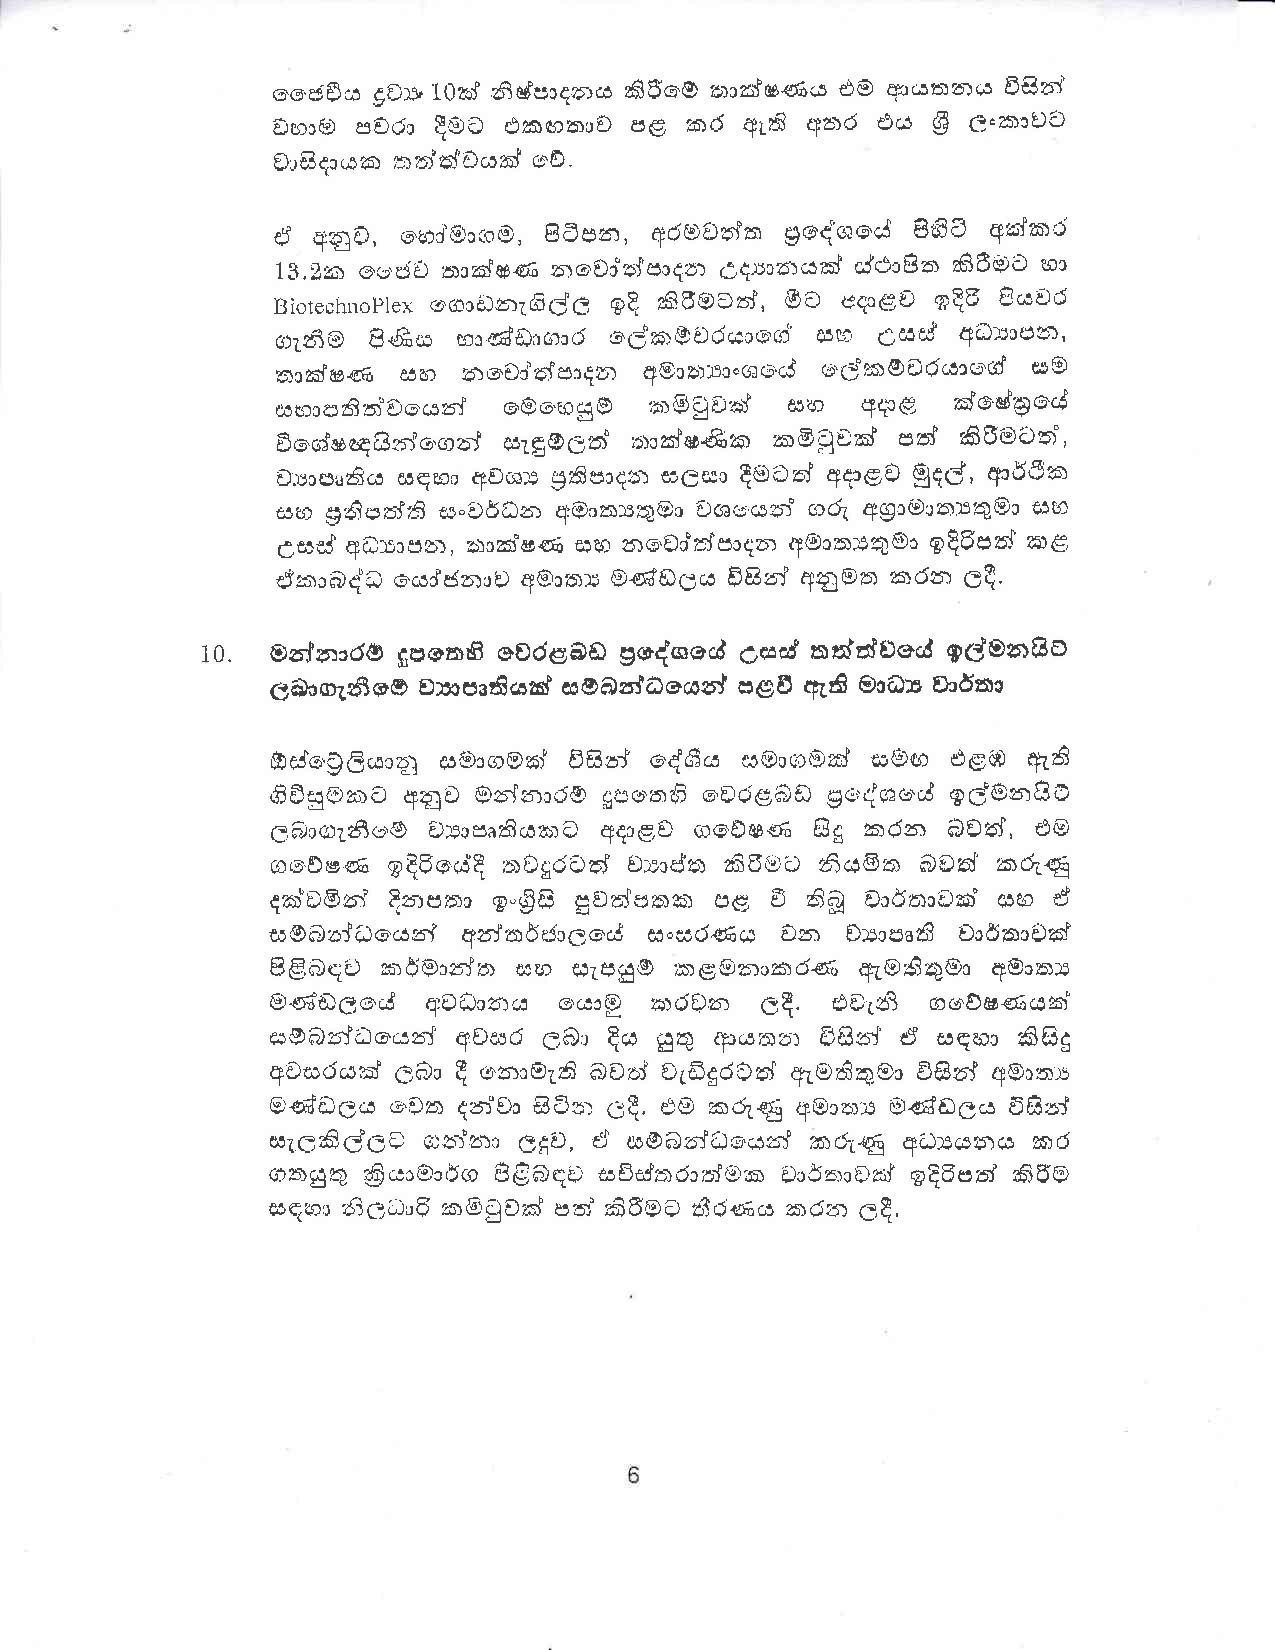 Cabinet Decision on 15.07.2020 page 006